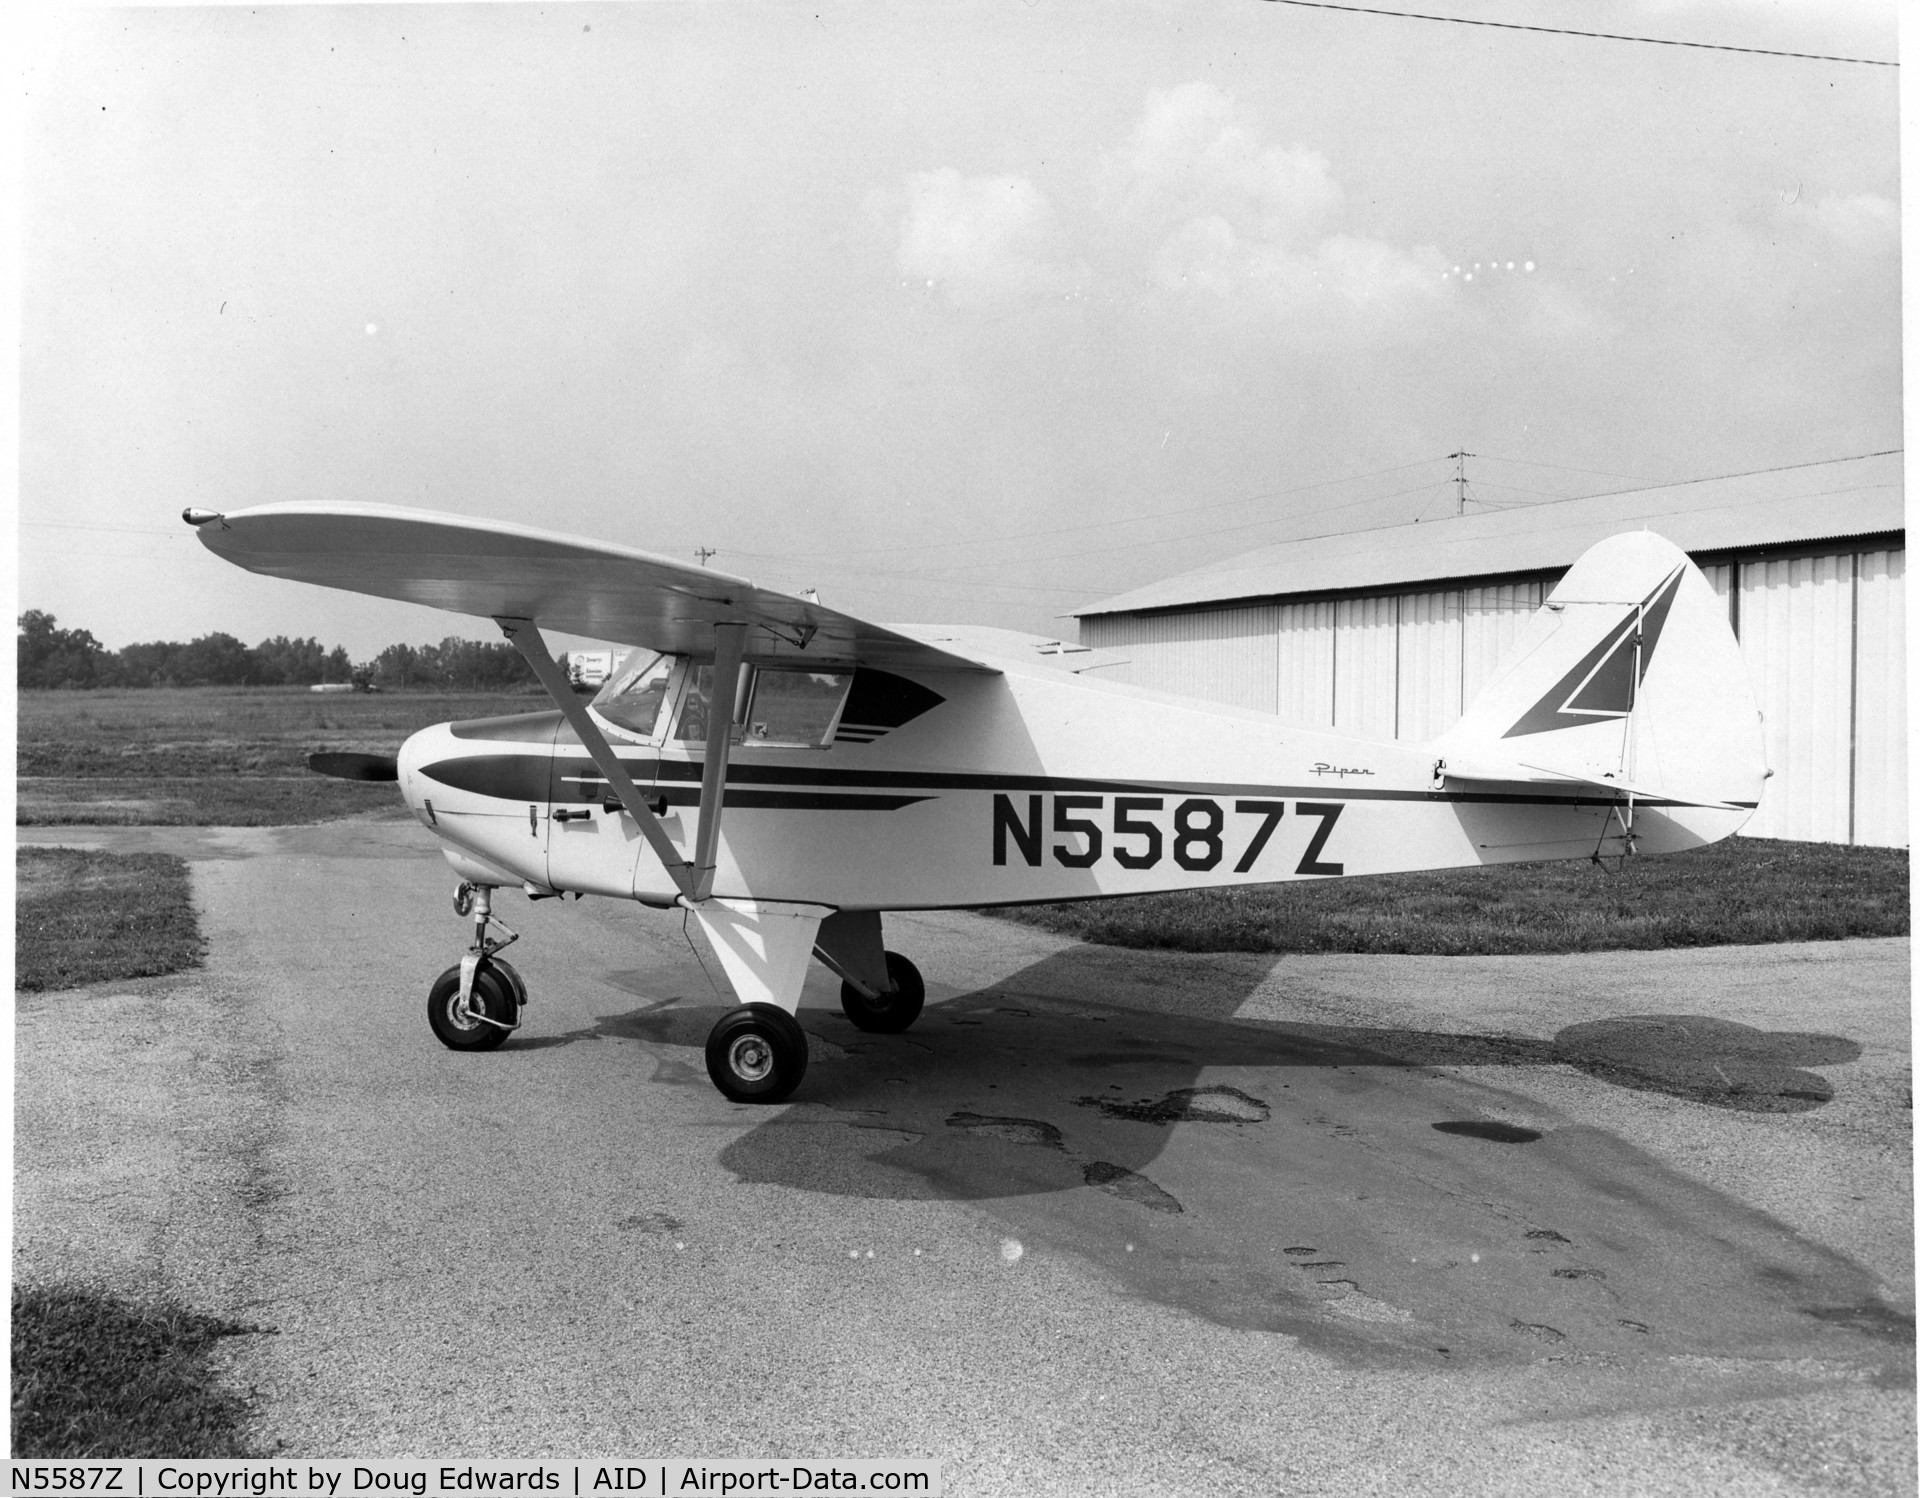 N5587Z, 1962 Piper PA-22-108 Colt C/N 22-9396, I. owned this Colt from 1969 - 72. Flew all over the U.S. and logged some 200hrs. Great little plane, but needed about 5kts plus over rated landing speed to make a good smooth landing